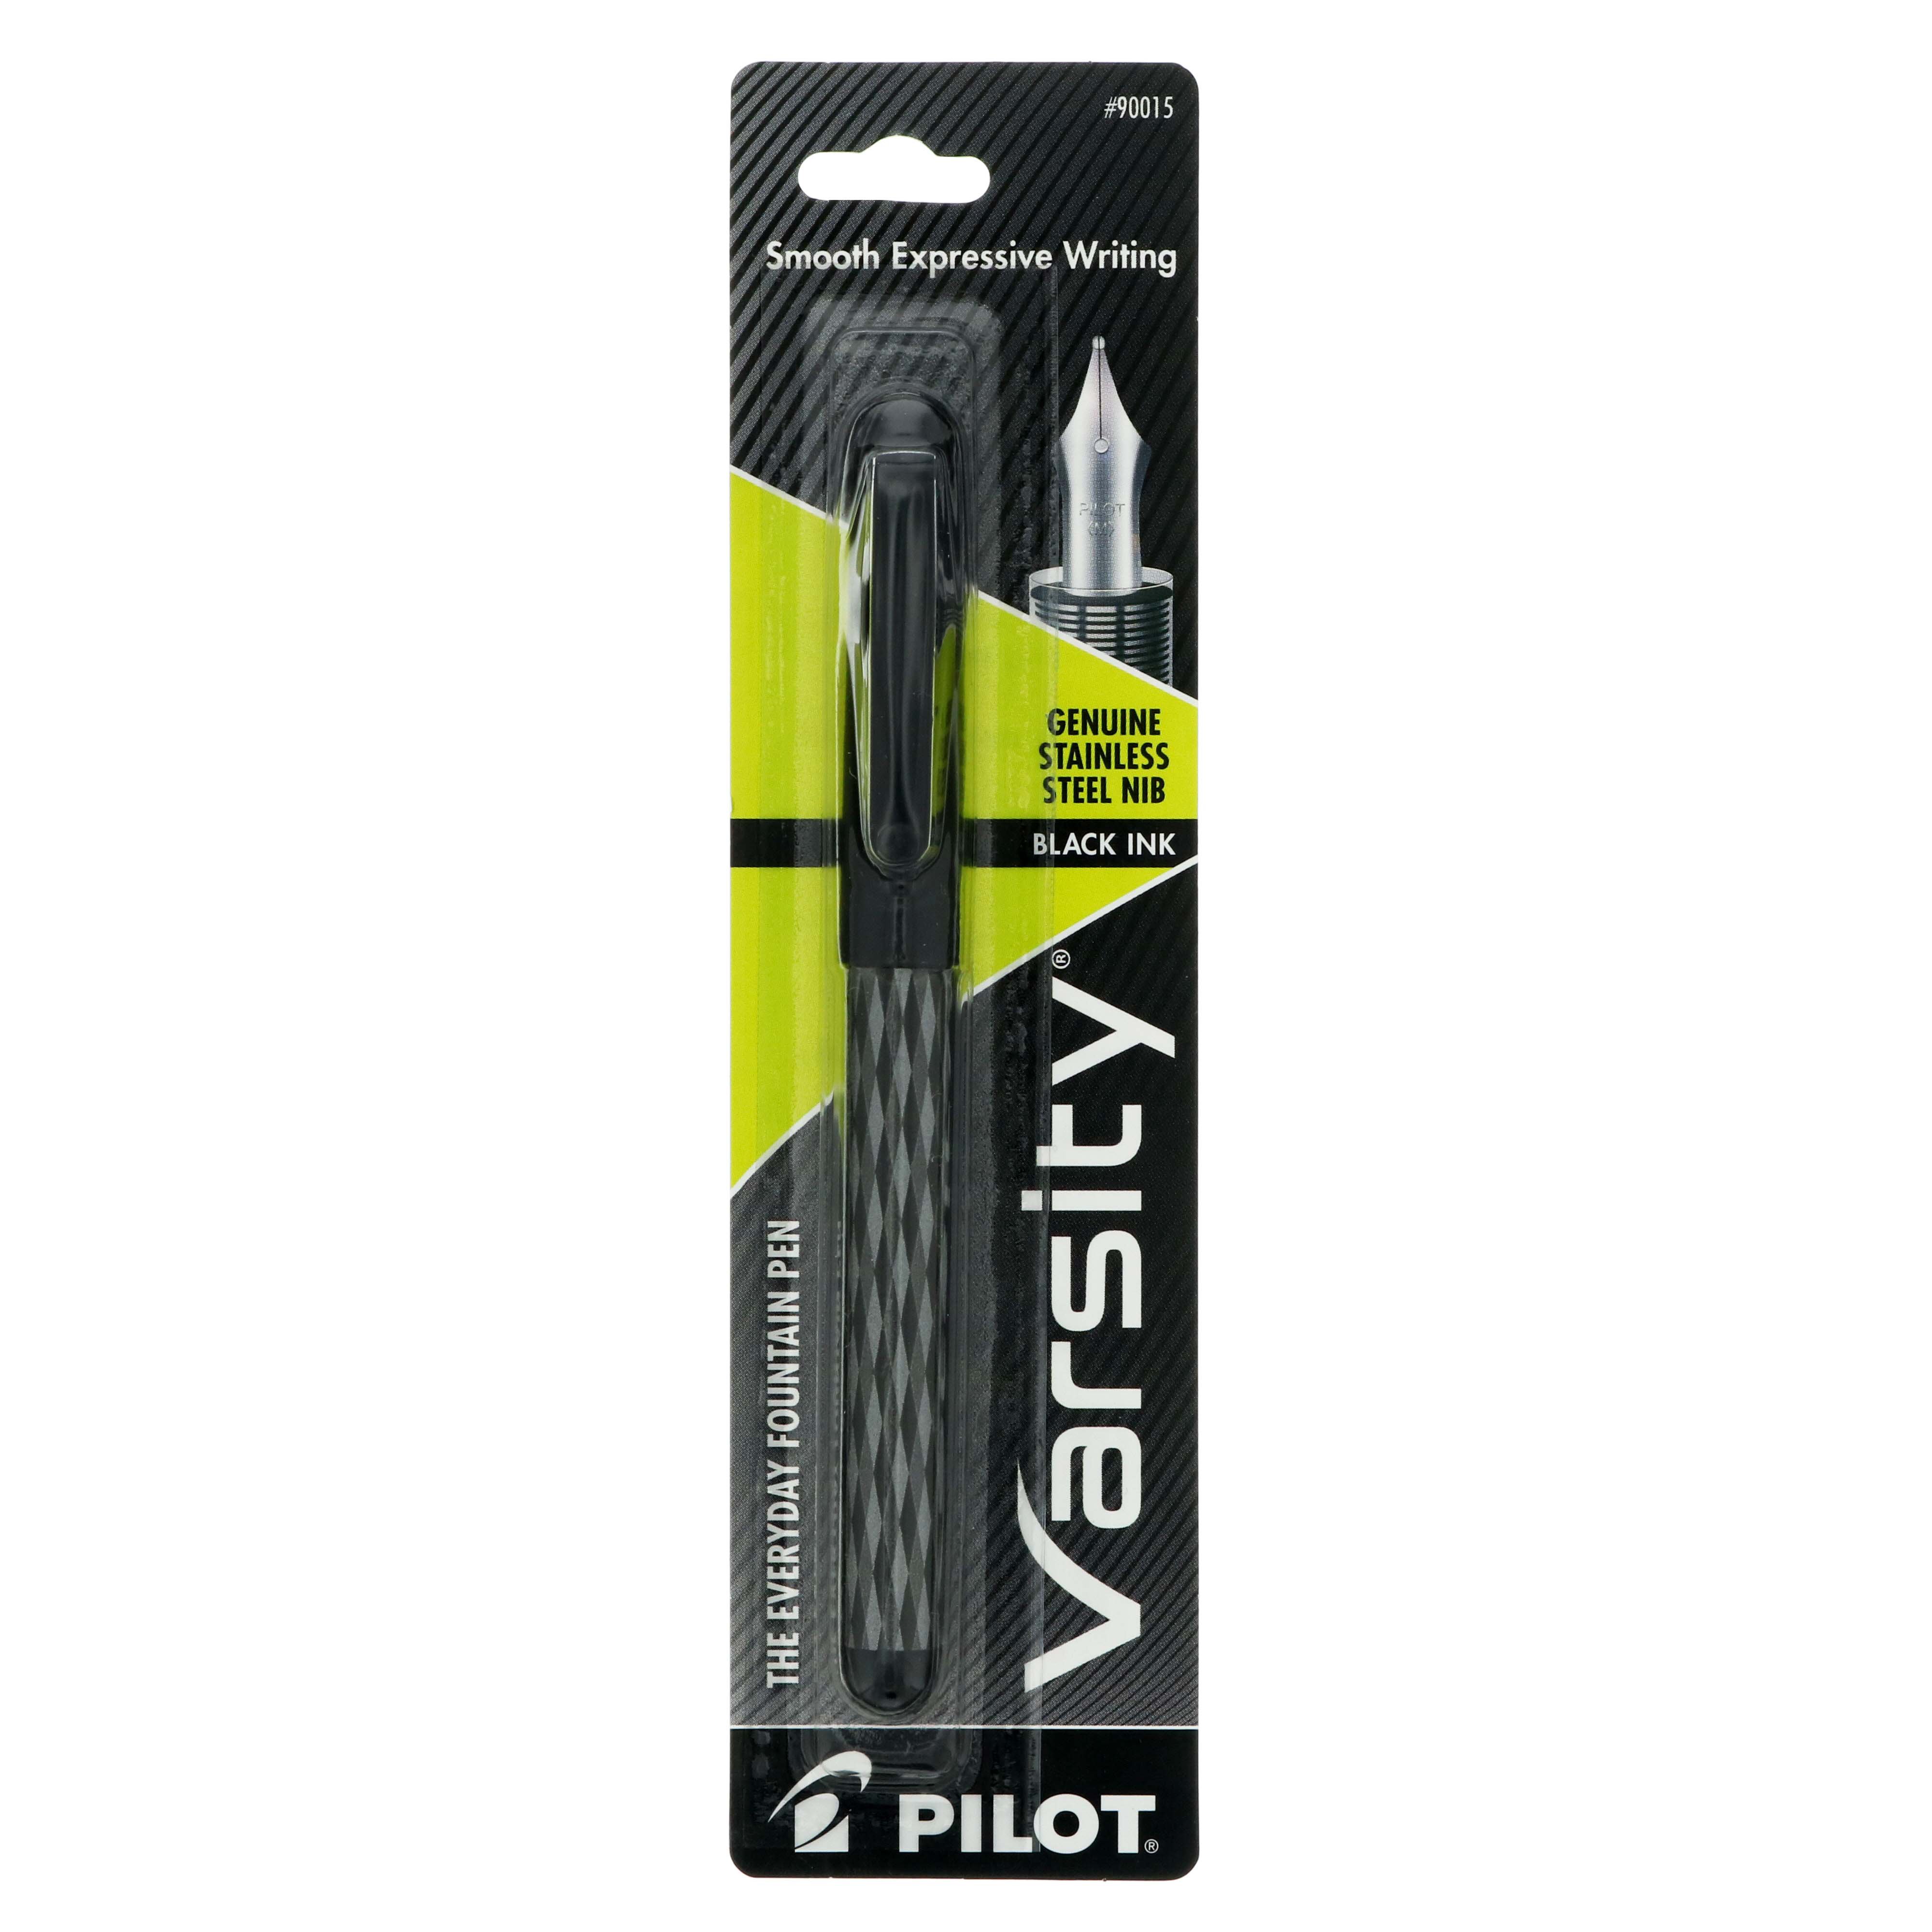 Pilot FriXion Black - Pens, Fountain Pens, Writing Instruments, Ink,  Stationery, Office Supplies